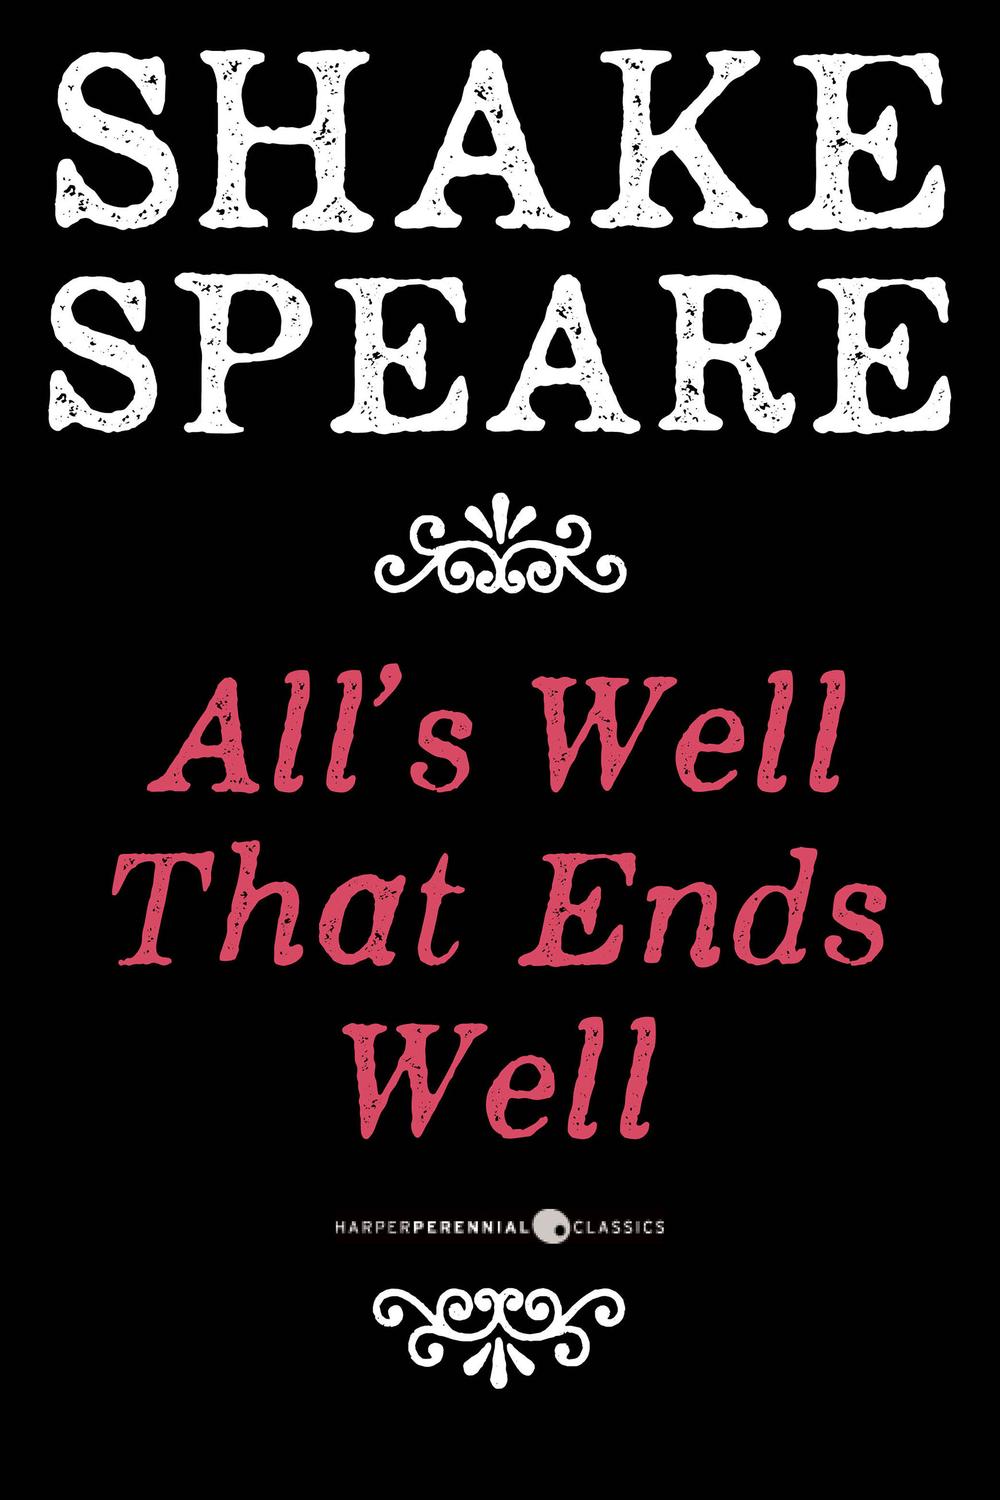 All's Well That Ends Well - William Shakespeare,,